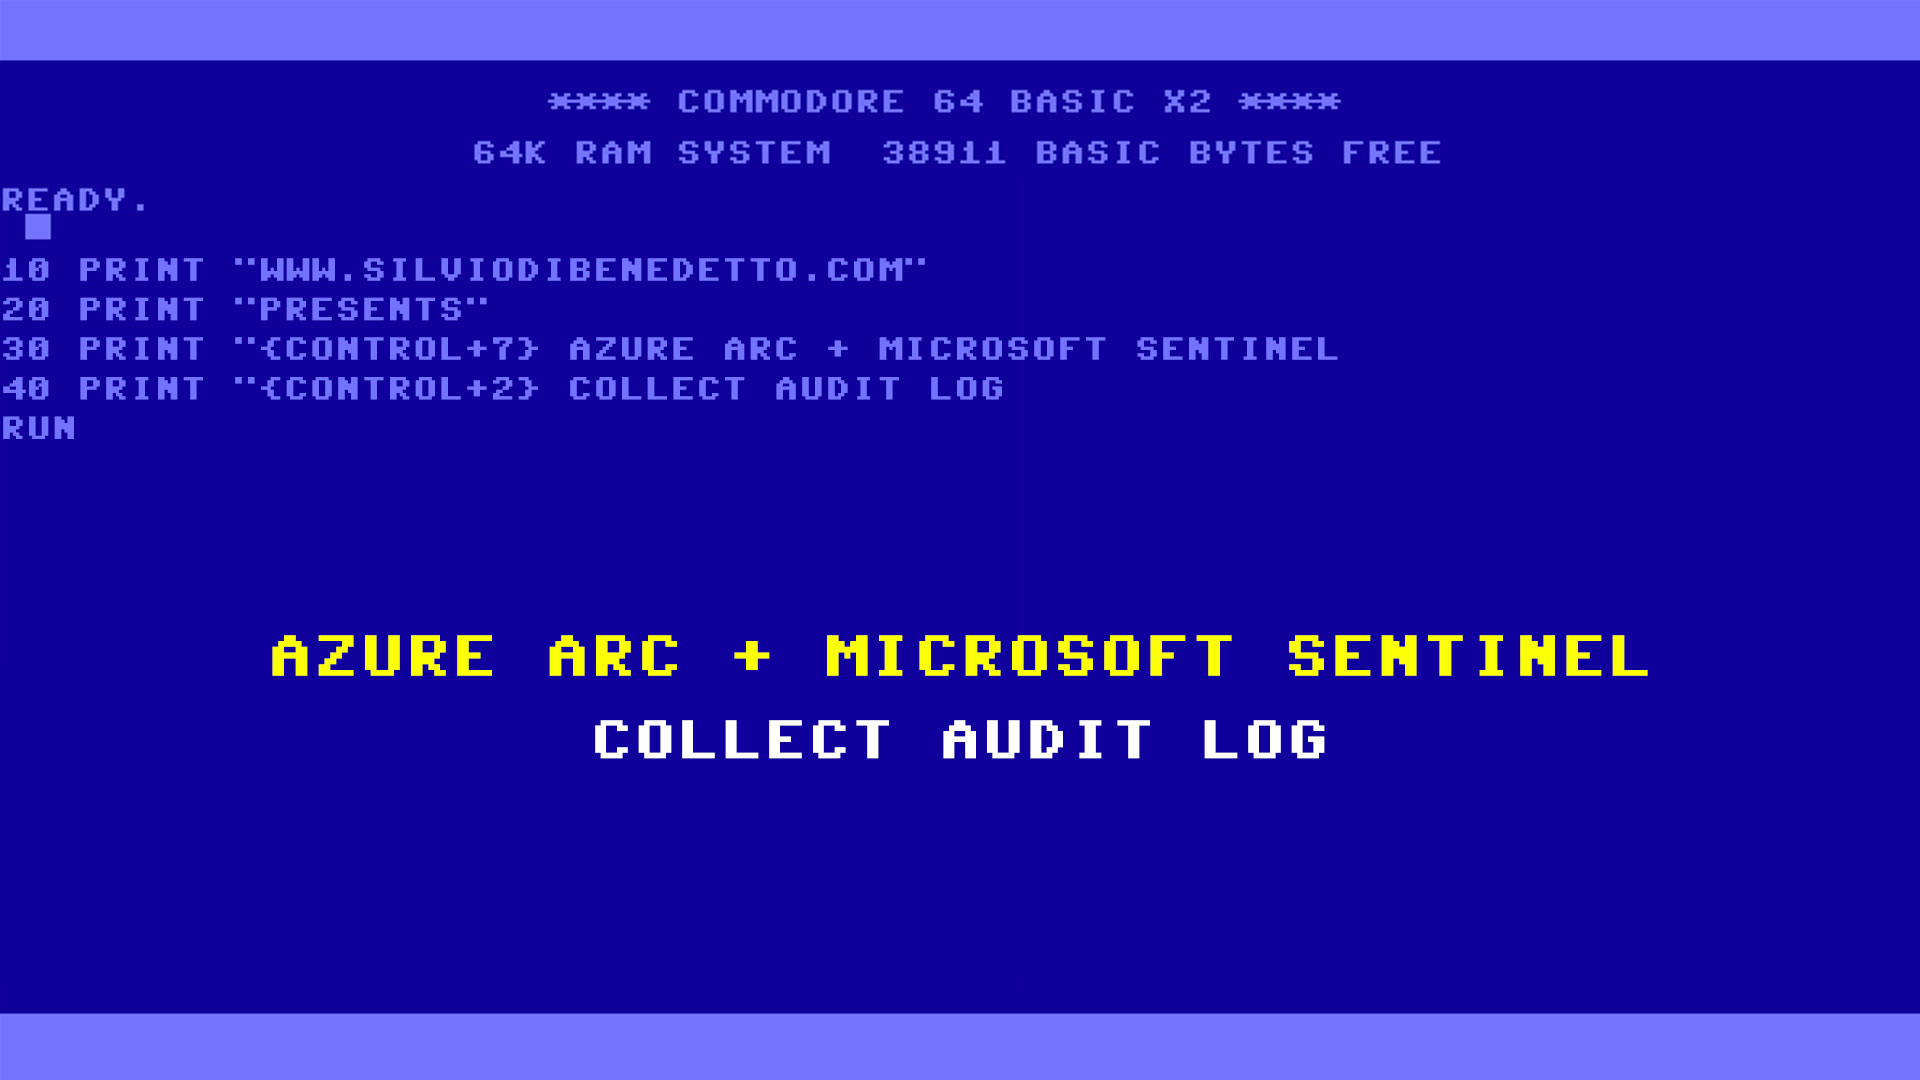 Collect audit log with Azure Arc and Microsoft Sentinel